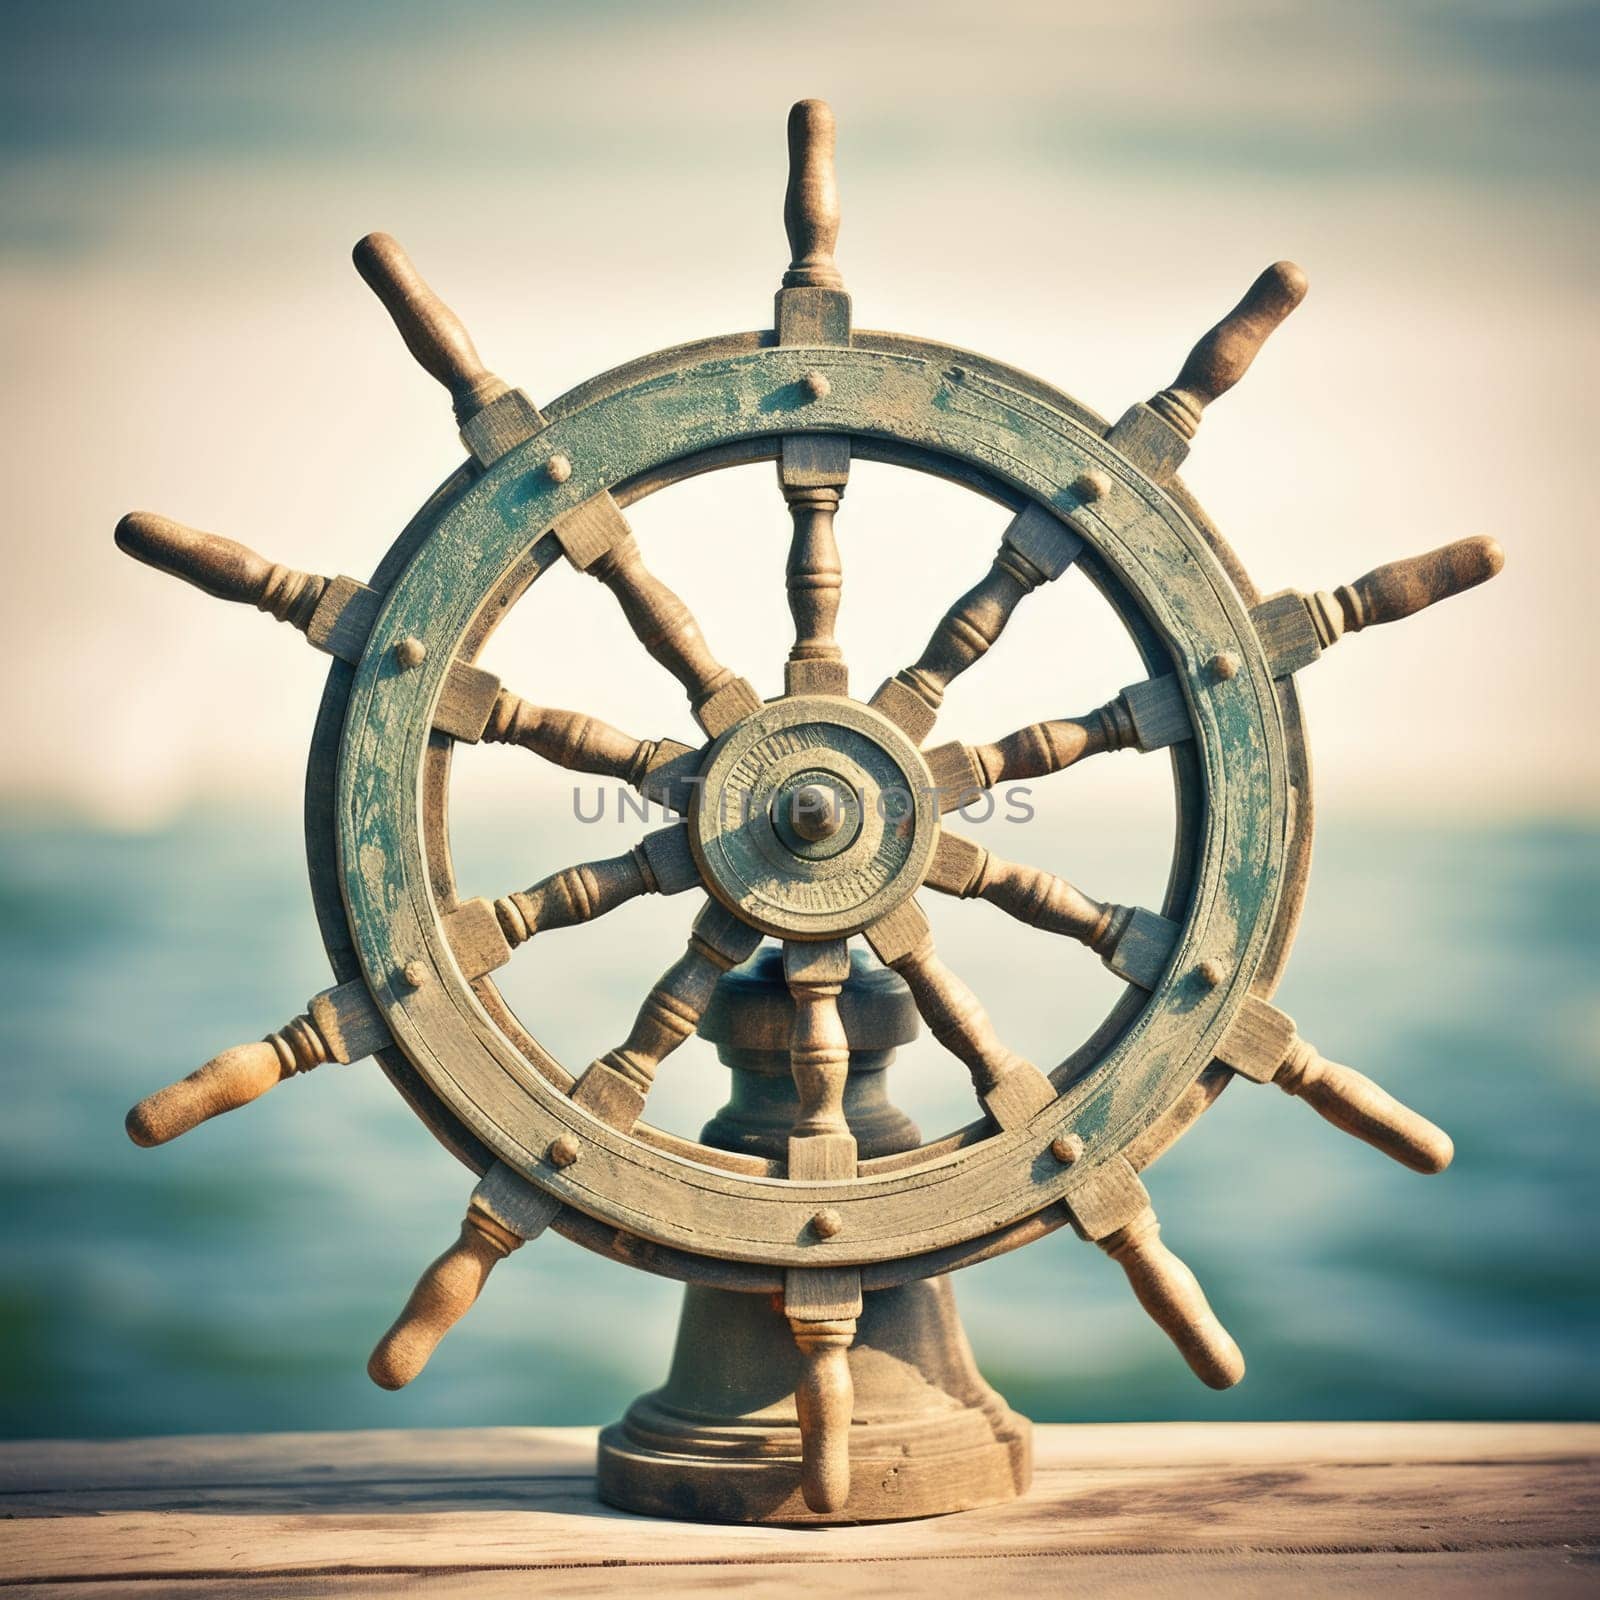 A ship wheel on a wooden table in front of the ocean, AI by starush